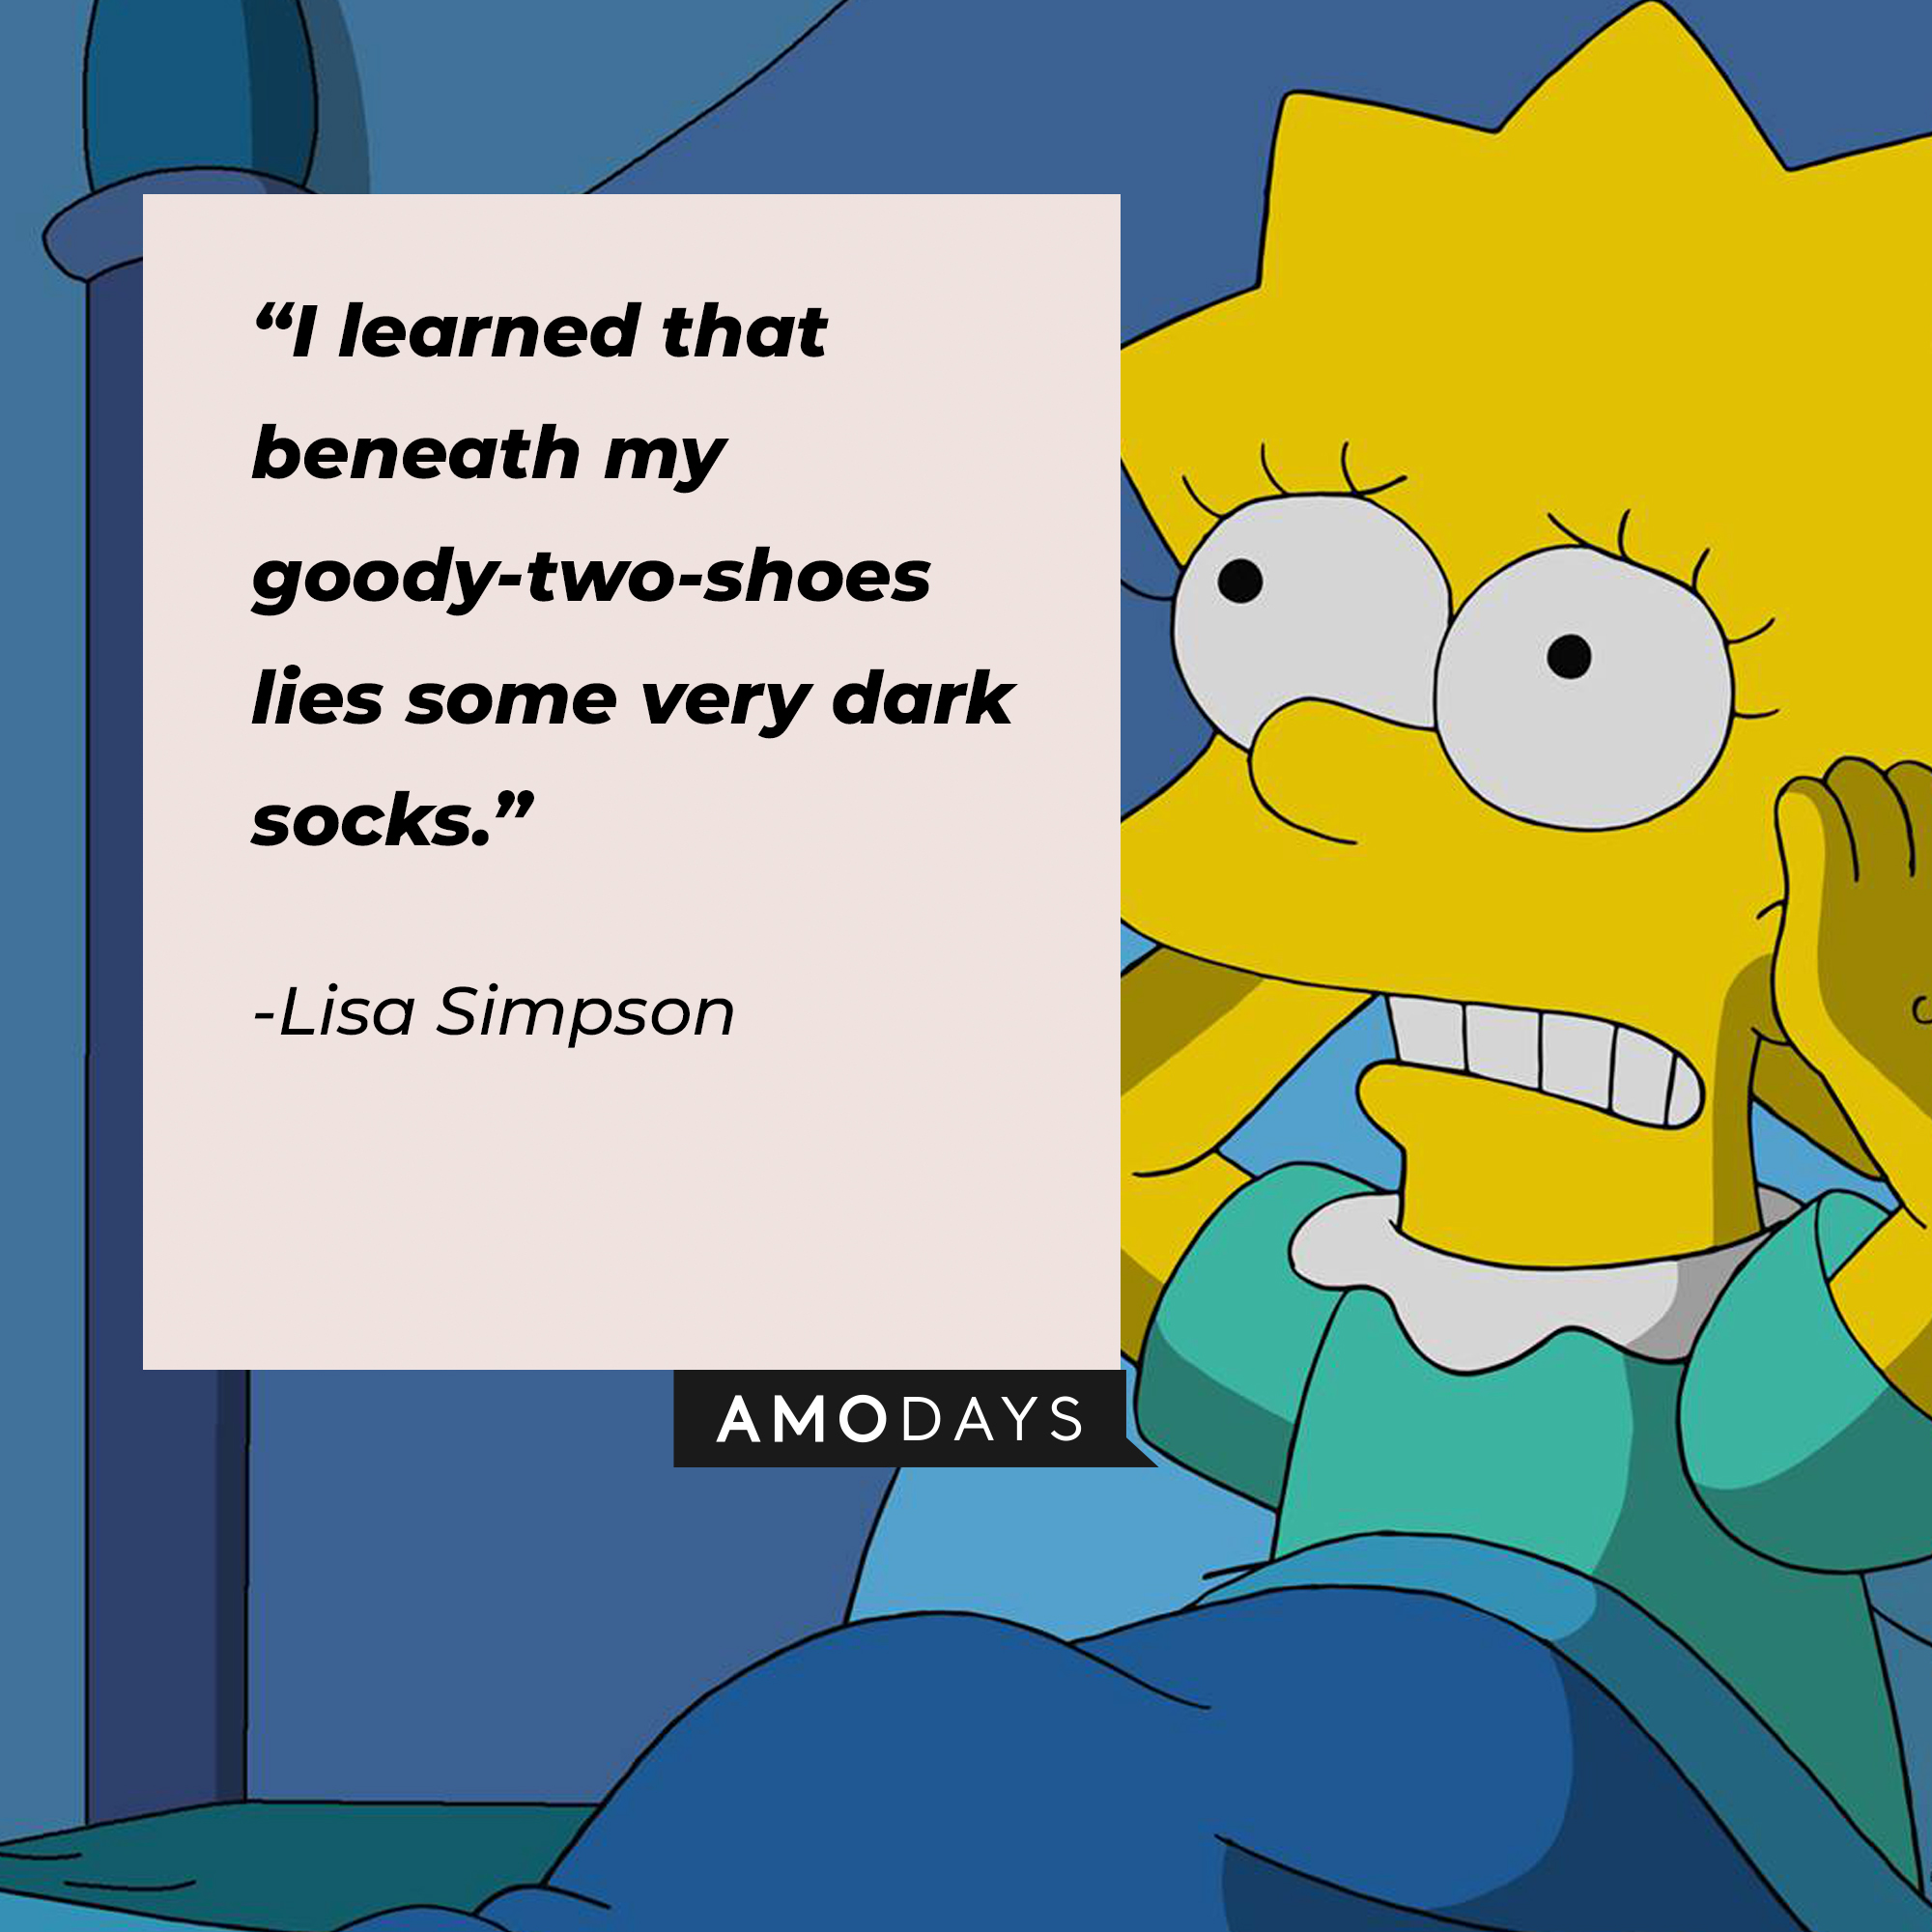 Lisa Simpson, with her quote: "I learned that beneath my goody-two-shoes lies some very dark socks." | Source: facebook.com/TheSimpsons